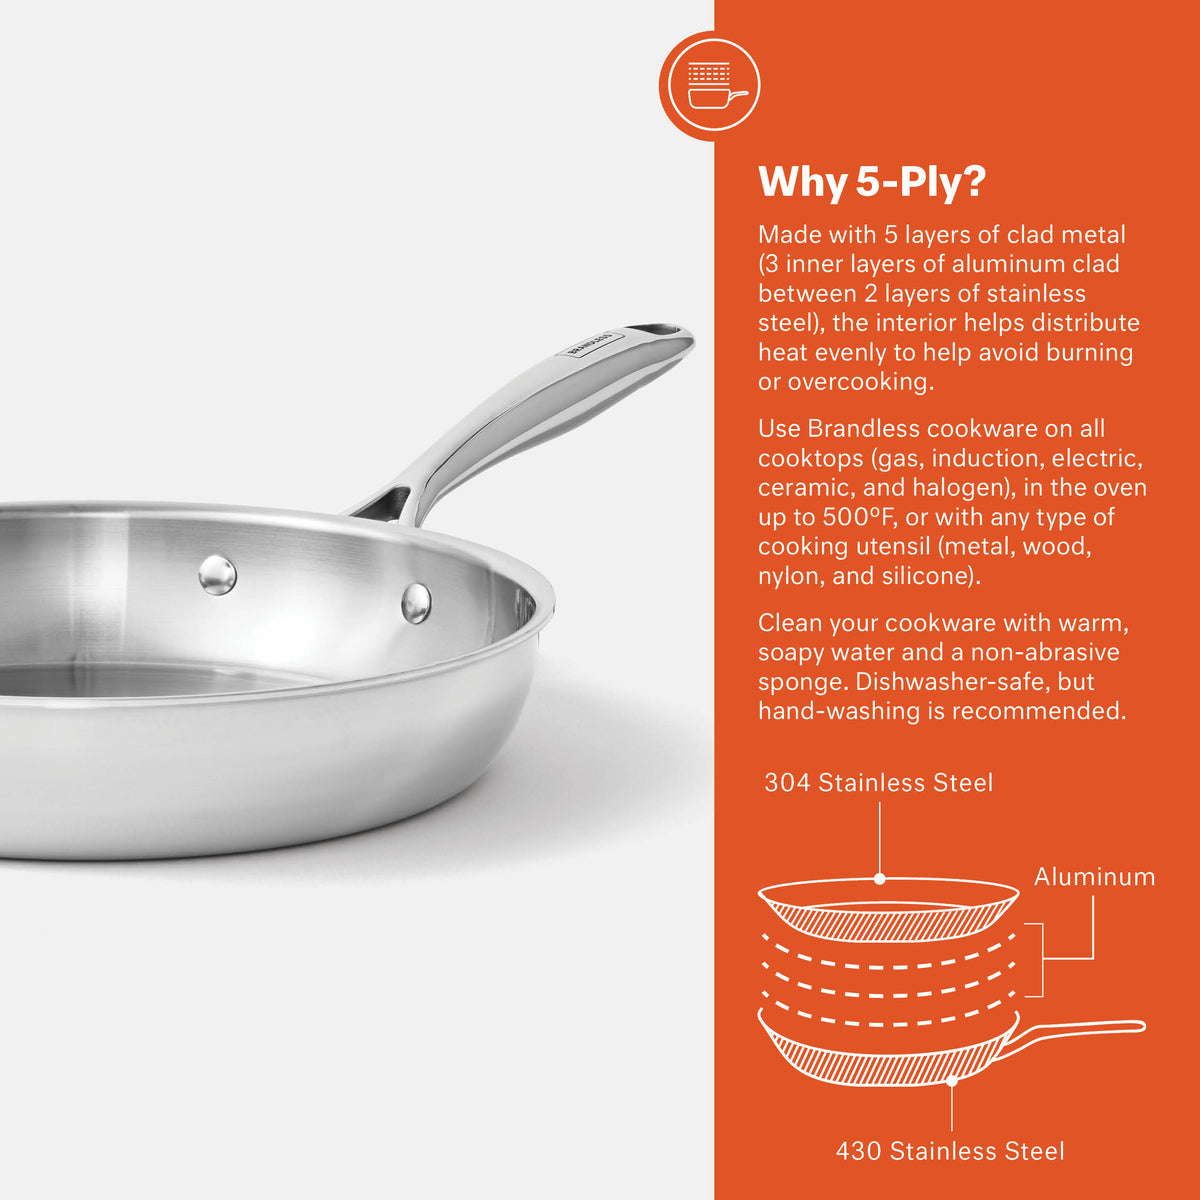 Product photo of fry pan on left, infographic on right. Why 5-ply? Made with 5 layers of clad metal (3 inner layers of aluminum clad between 2 layers of stainless steel), the interior helps distribute heat evenly to help avoid burning or overcooking.